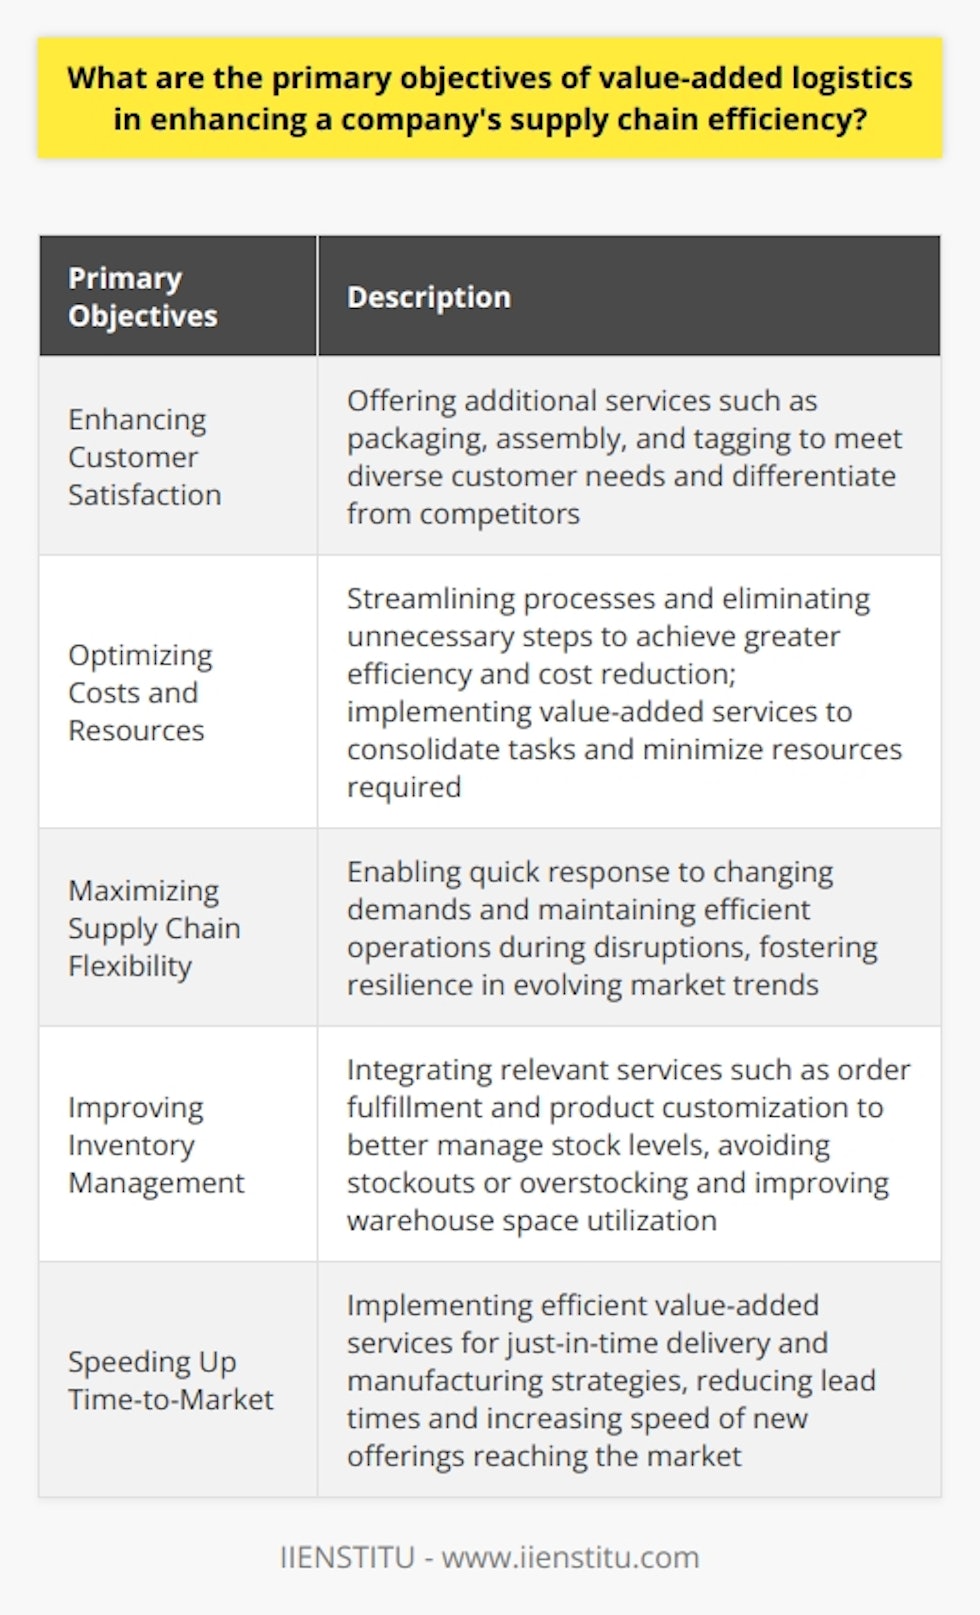 Value-added logistics plays a crucial role in enhancing a company's supply chain efficiency by focusing on several primary objectives. The first objective is to enhance customer satisfaction. By offering additional services such as packaging, assembly, and tagging, companies can meet the diverse needs of their customers. This helps businesses differentiate themselves from competitors and satisfy specific customer demands.The second objective is to optimize costs and resources within the supply chain. Streamlining processes and eliminating unnecessary steps leads to greater efficiency and cost reduction. By implementing value-added services like packaging and labeling, companies can consolidate various tasks, ultimately minimizing the resources required for product handling.The third objective is to maximize the flexibility of the supply chain. Amidst shifting market conditions and customer requirements, adaptability is crucial for maintaining competitiveness. Value-added logistics enables companies to respond quickly to changing demands and maintain efficient operations even during supply chain disruptions. This fosters resilience in the face of evolving market trends.The fourth objective is effective inventory management. By integrating relevant services such as order fulfillment and product customization, companies can better manage their stock levels and avoid stockouts or overstocking. Improved inventory control leads to better utilization of warehouse space and smoother product flow throughout the supply chain.The fifth and final objective is to expedite time-to-market for new products or product variations. In a rapidly changing consumer preferences landscape, getting products to the market quickly is vital. Through efficient value-added services, companies can implement just-in-time delivery and manufacturing strategies, reducing lead times and increasing the speed at which new offerings reach their intended audience.In summary, the primary objectives of value-added logistics in enhancing a company's supply chain efficiency are: enhancing customer satisfaction, optimizing costs and resources, maximizing supply chain flexibility, improving inventory management, and speeding up time-to-market. Prioritizing these objectives helps companies significantly enhance their supply chain efficiency and maintain a competitive edge in the market.